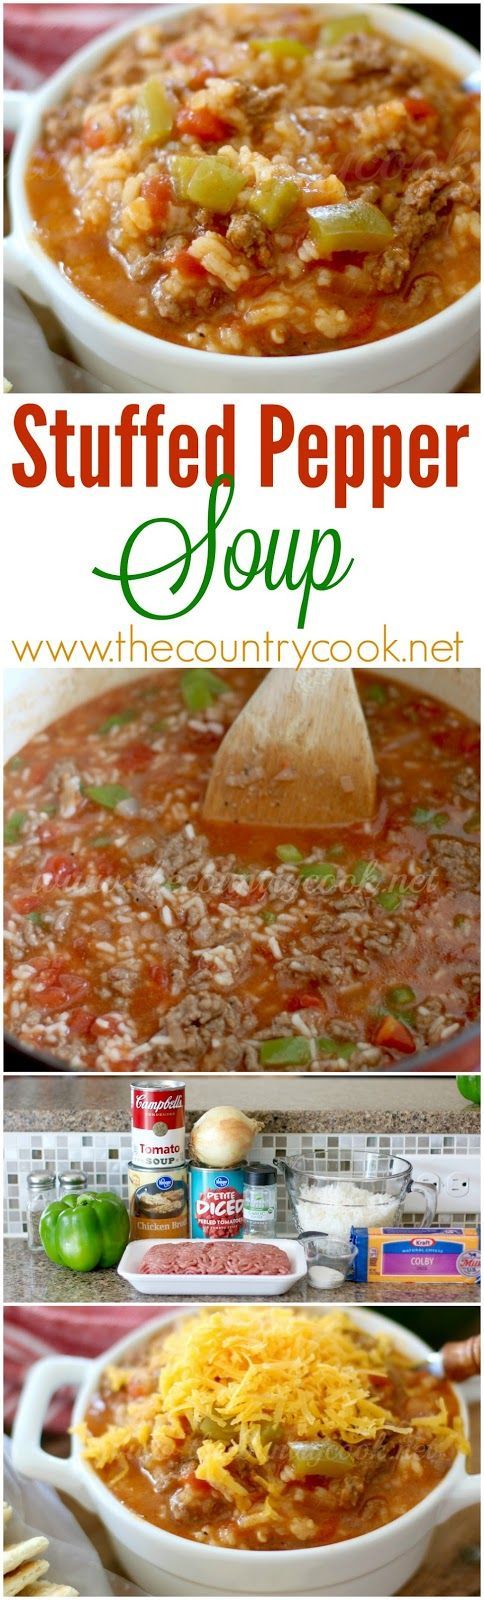 Stuffed Pepper Soup recipe from The Country Cook. Full of rice, ground beef…